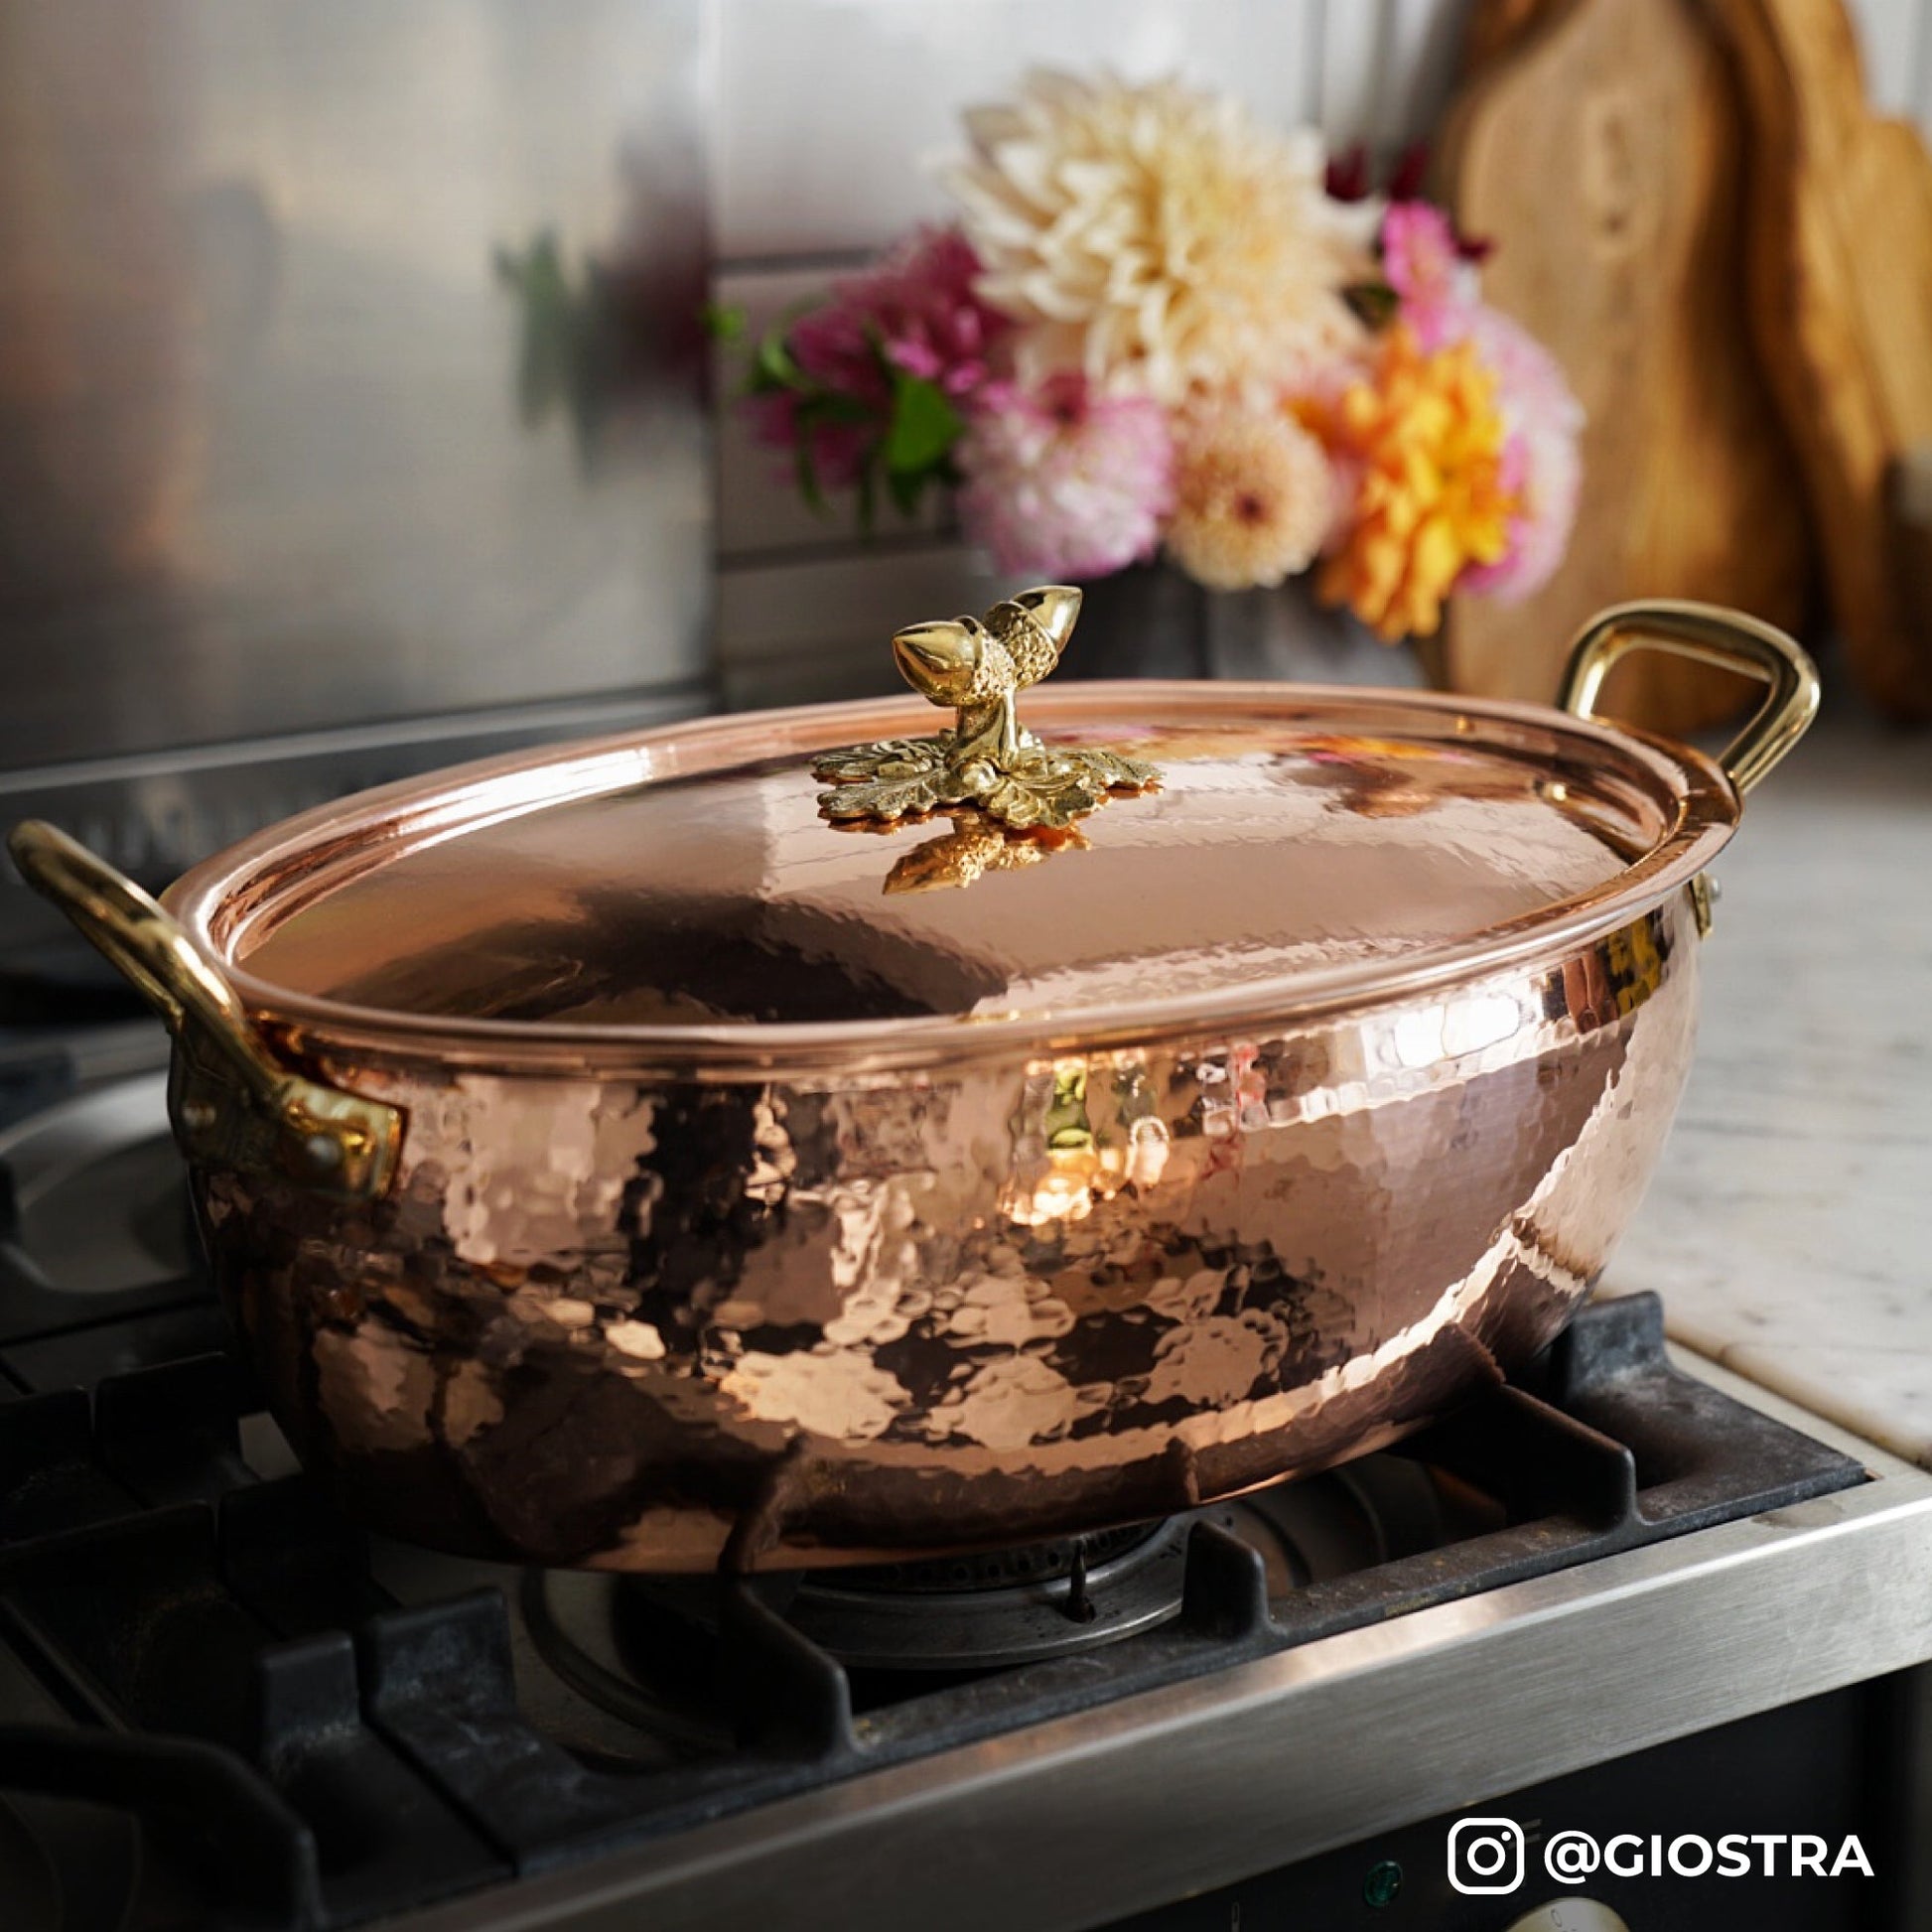 Hammered copper 8 Qt Oval Casserole lined with high purity tin applied by hand over fire and bronze handles, from Ruffoni Historia collection